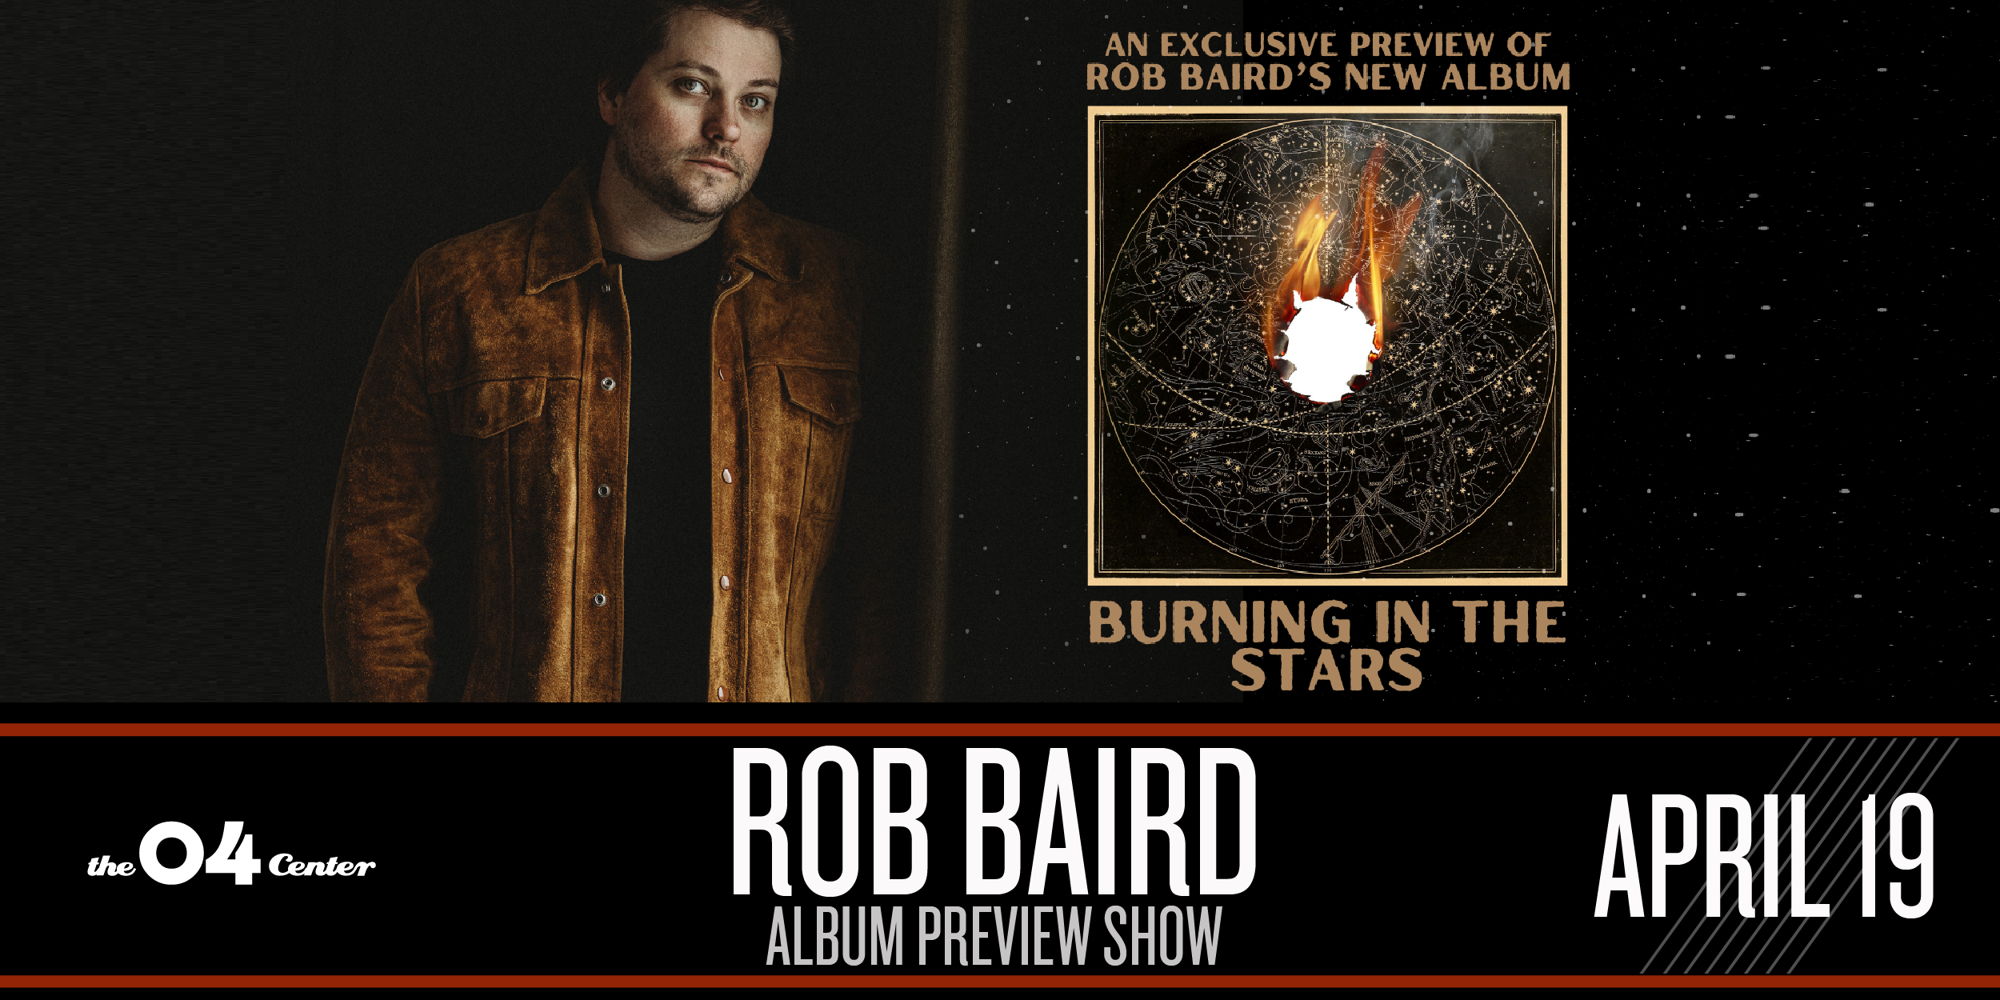 Rob Baird // Album Preview Show with special guest Rick Brantley promotional image